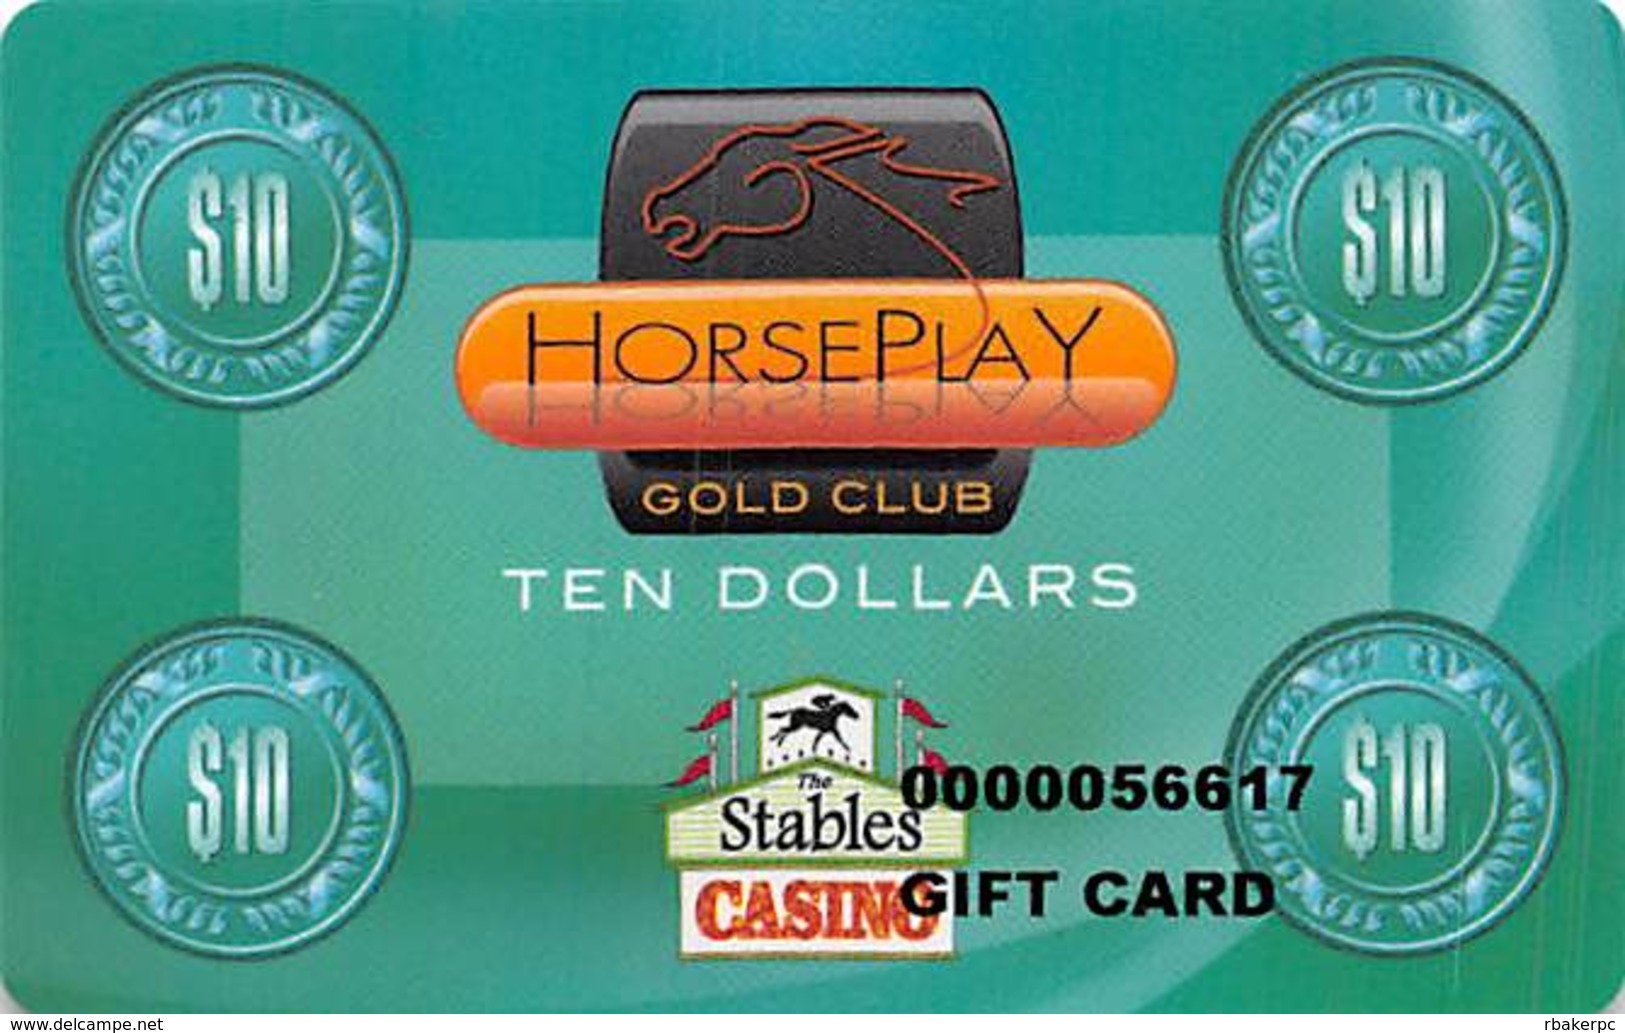 Stables Casino - Maimi, OK - $10 Horse Play Gift Card / Slot Card - Casino Cards